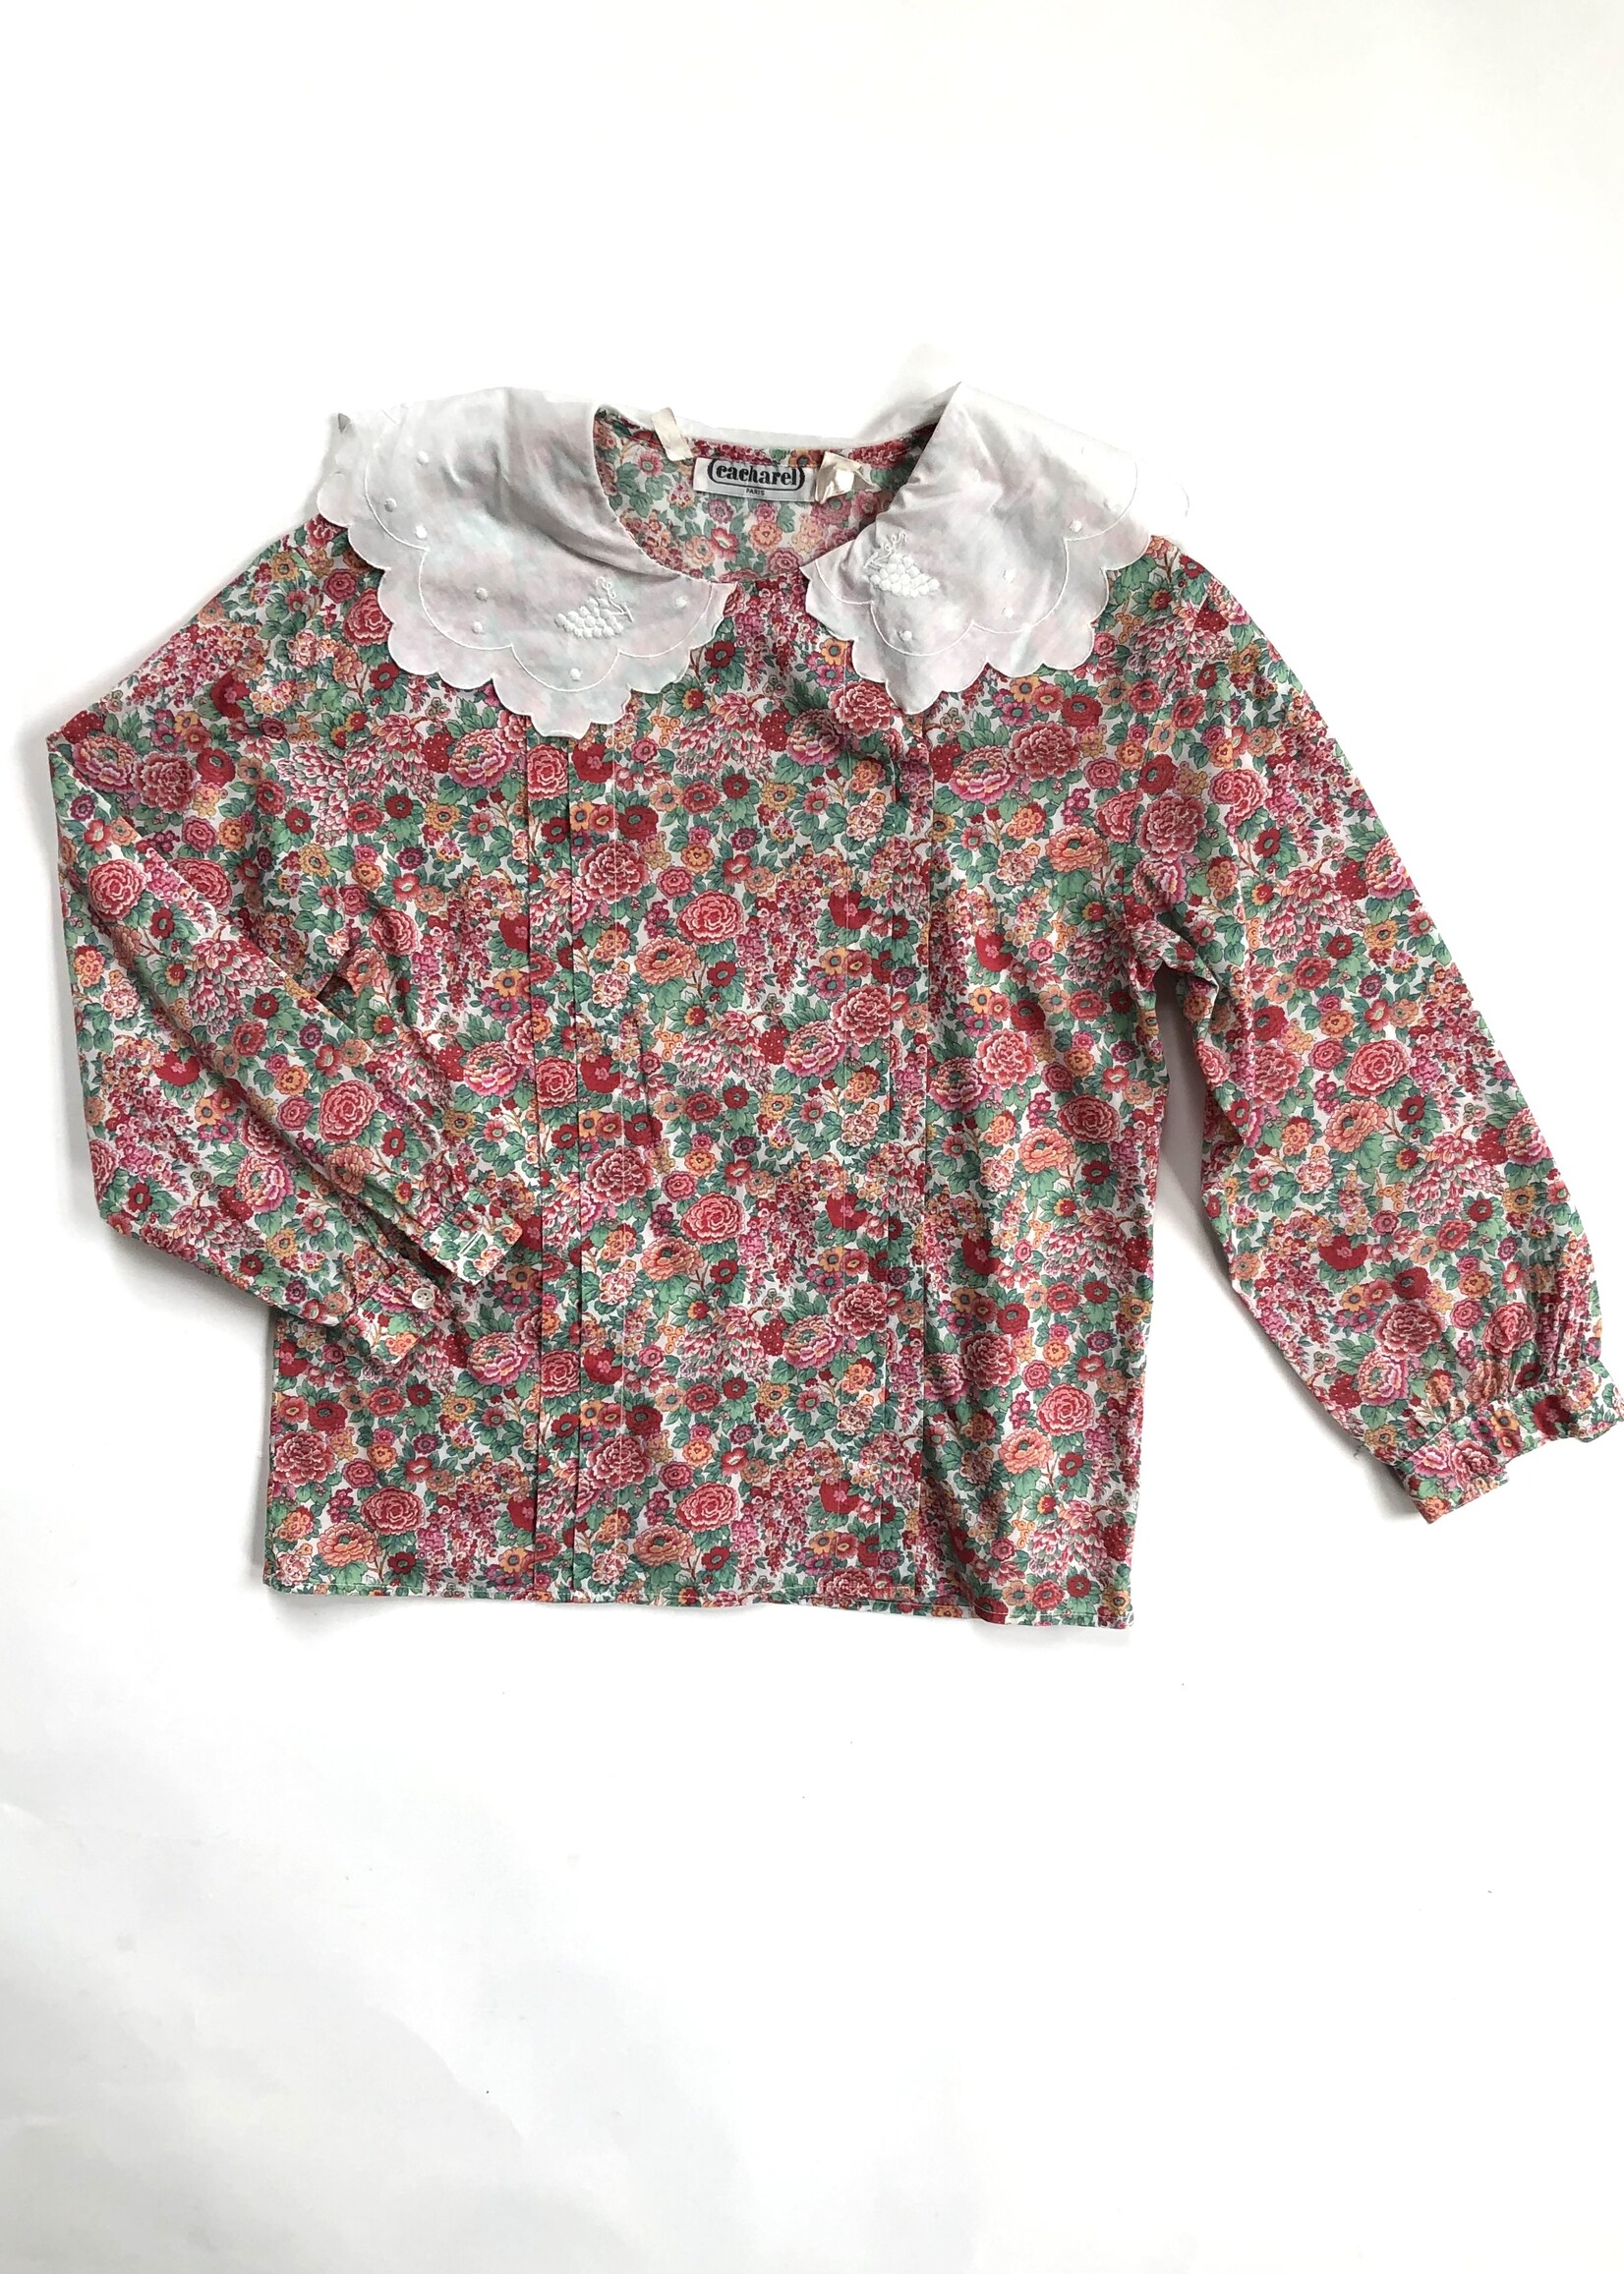 Cacharel Soft floral collar blouse 6-8y